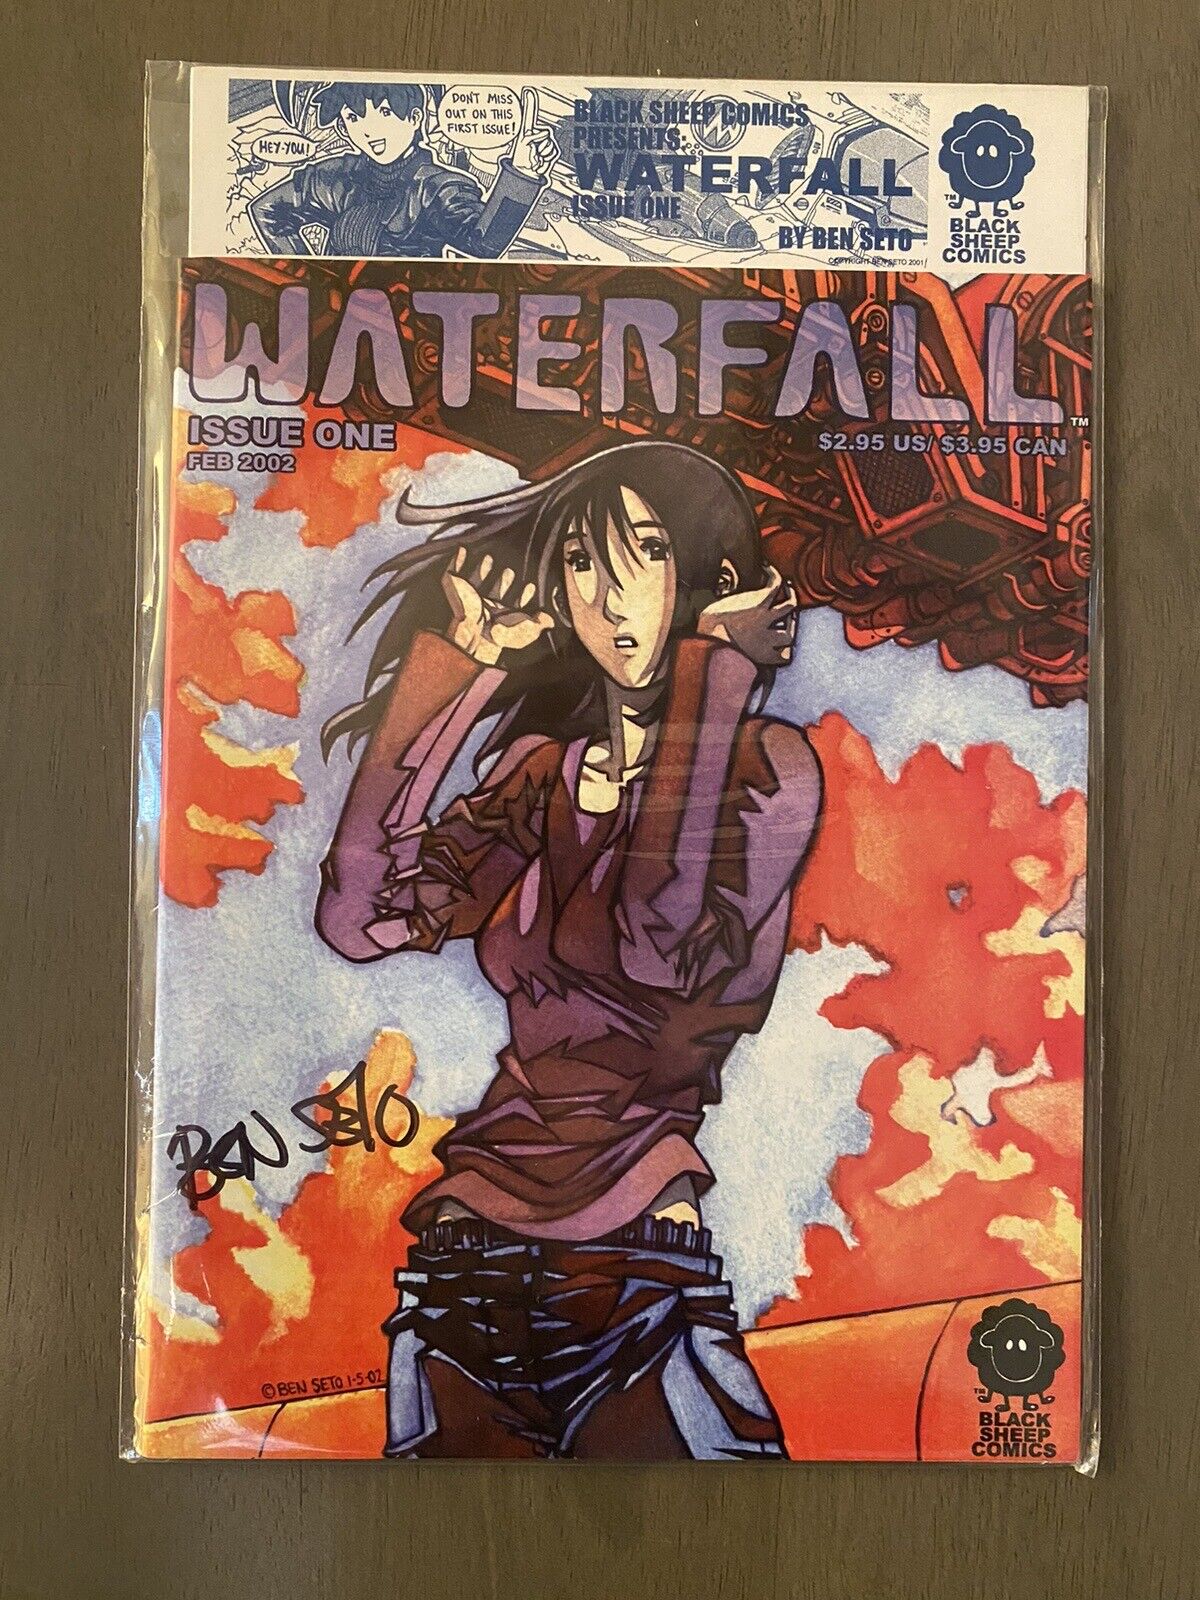 Vintage RARE Y2K - Waterfall - Issue 1 - Black Sheep Comic Book - Signed